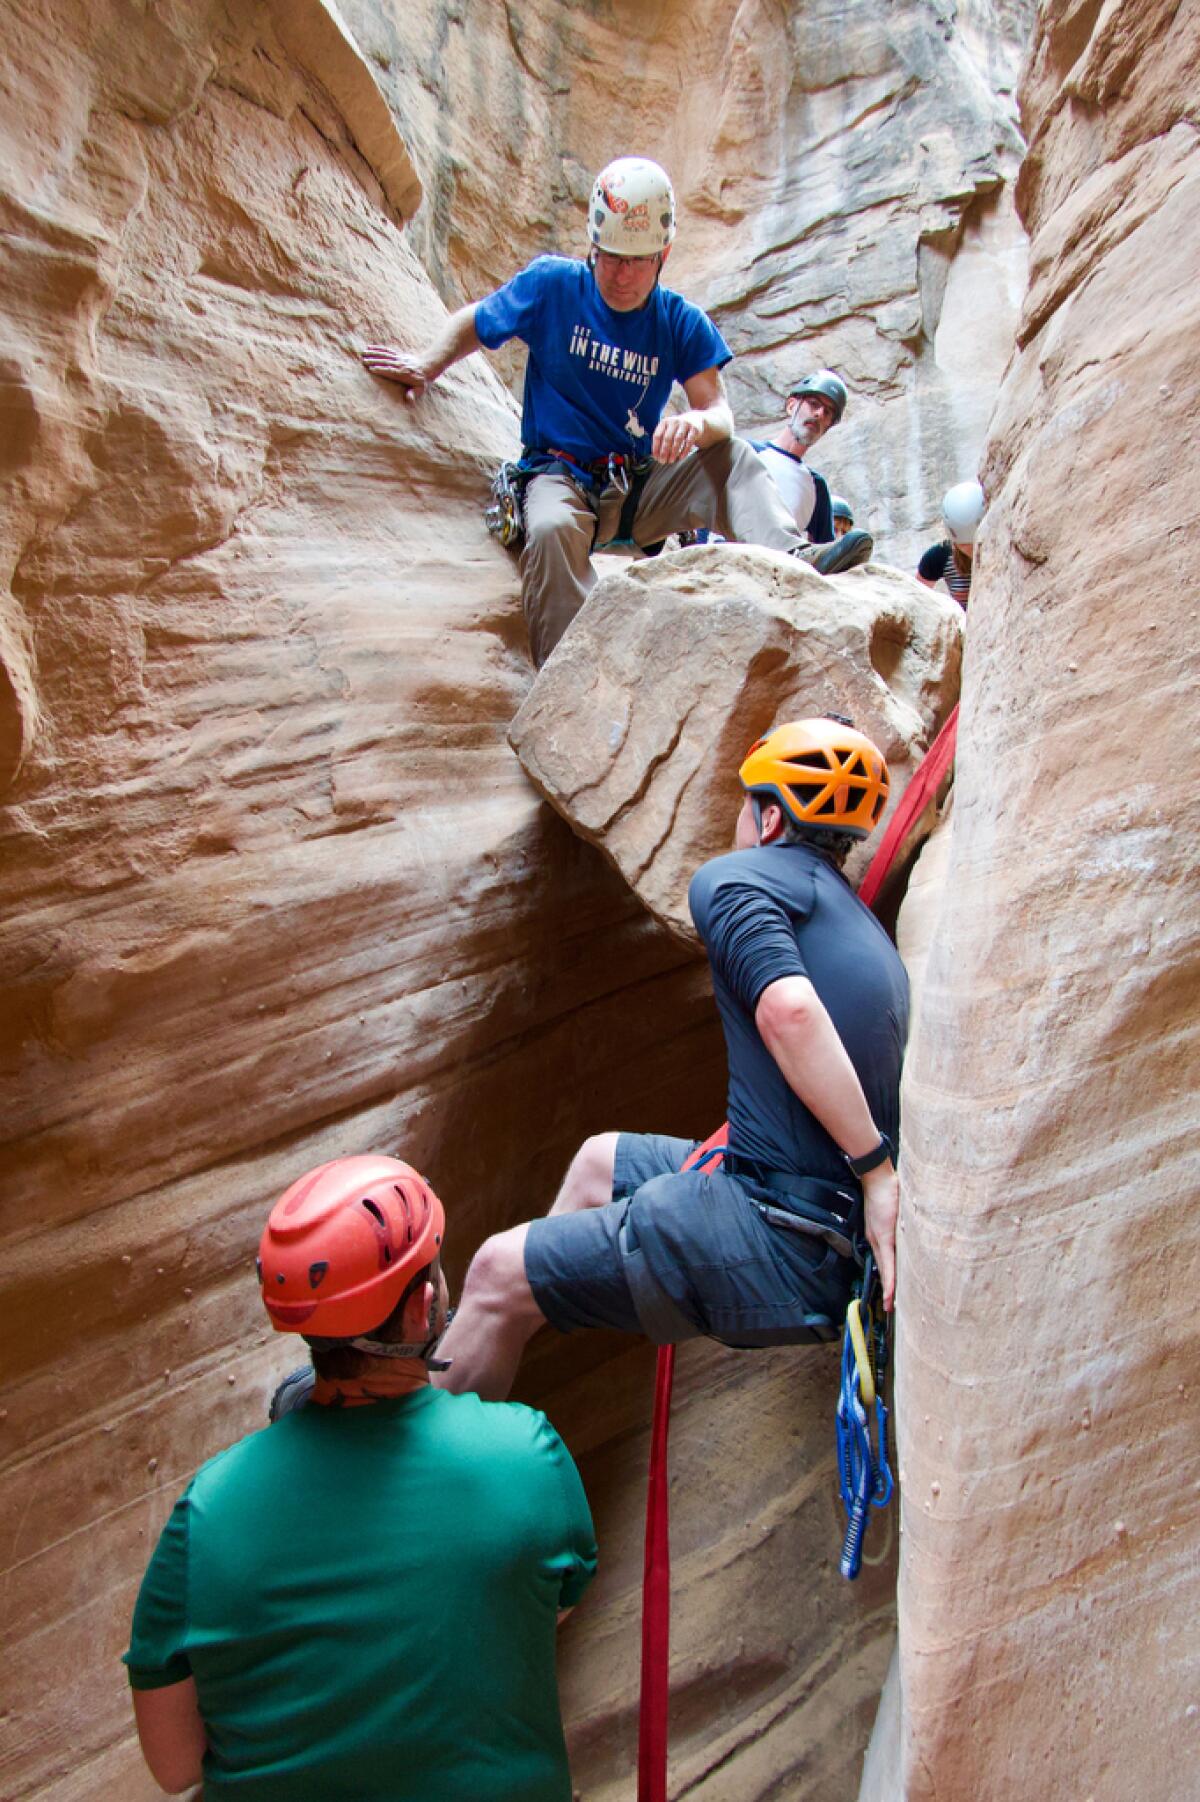 Students clamber up the steep sides of a slot canyon in Utah.